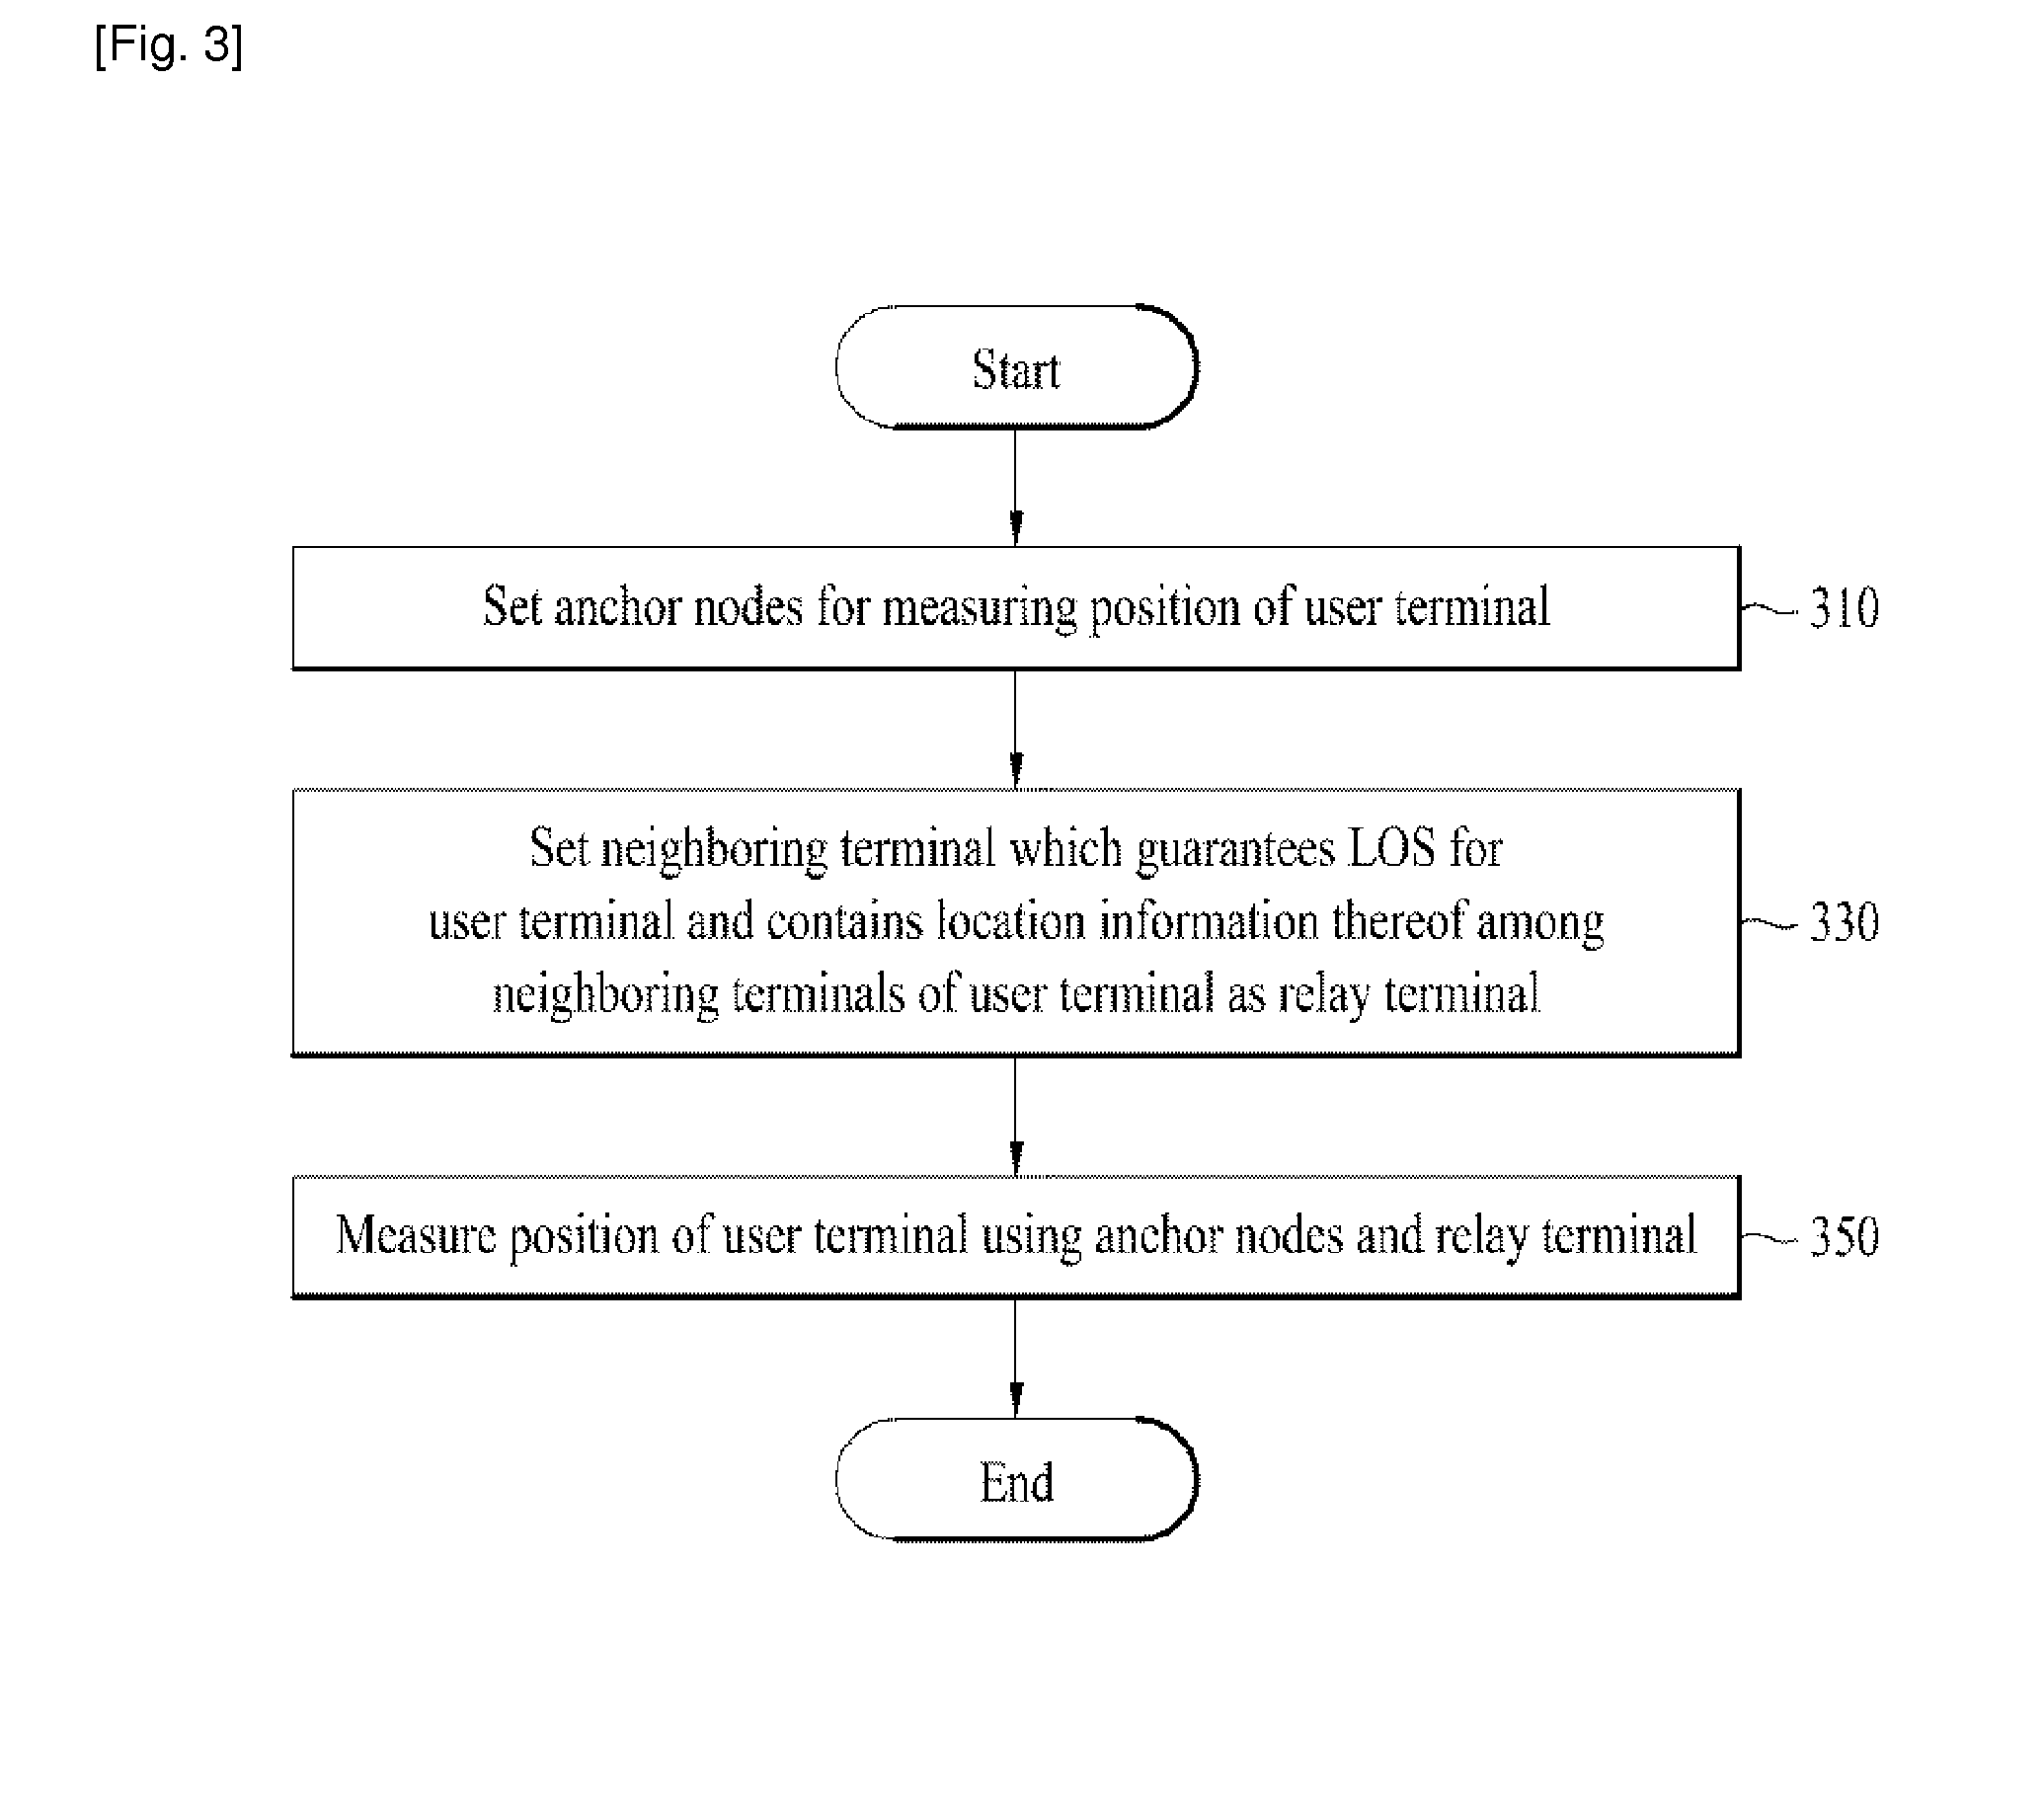 Method for measuring position of user terminal